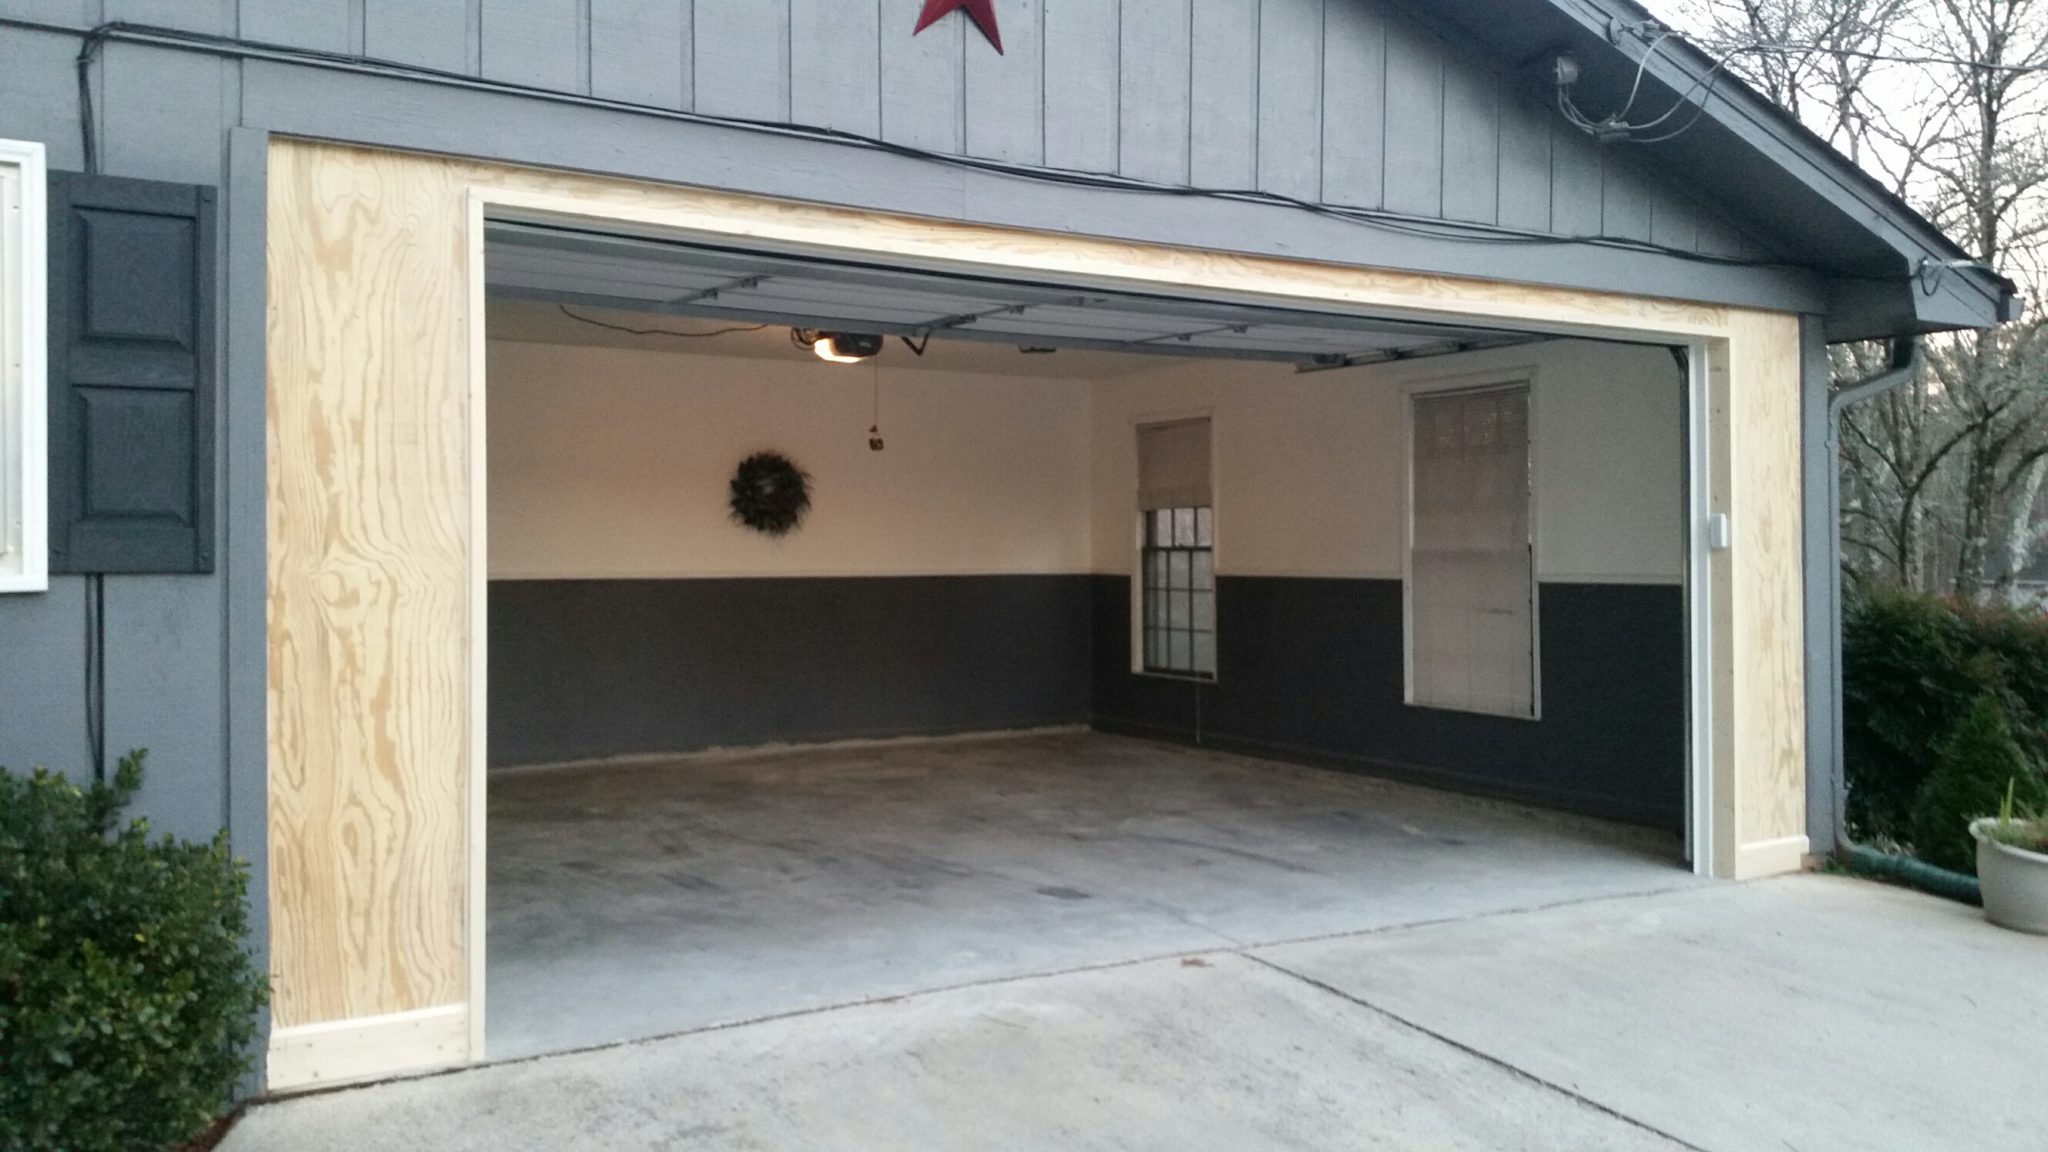 Does converting a carport to a garage add value?